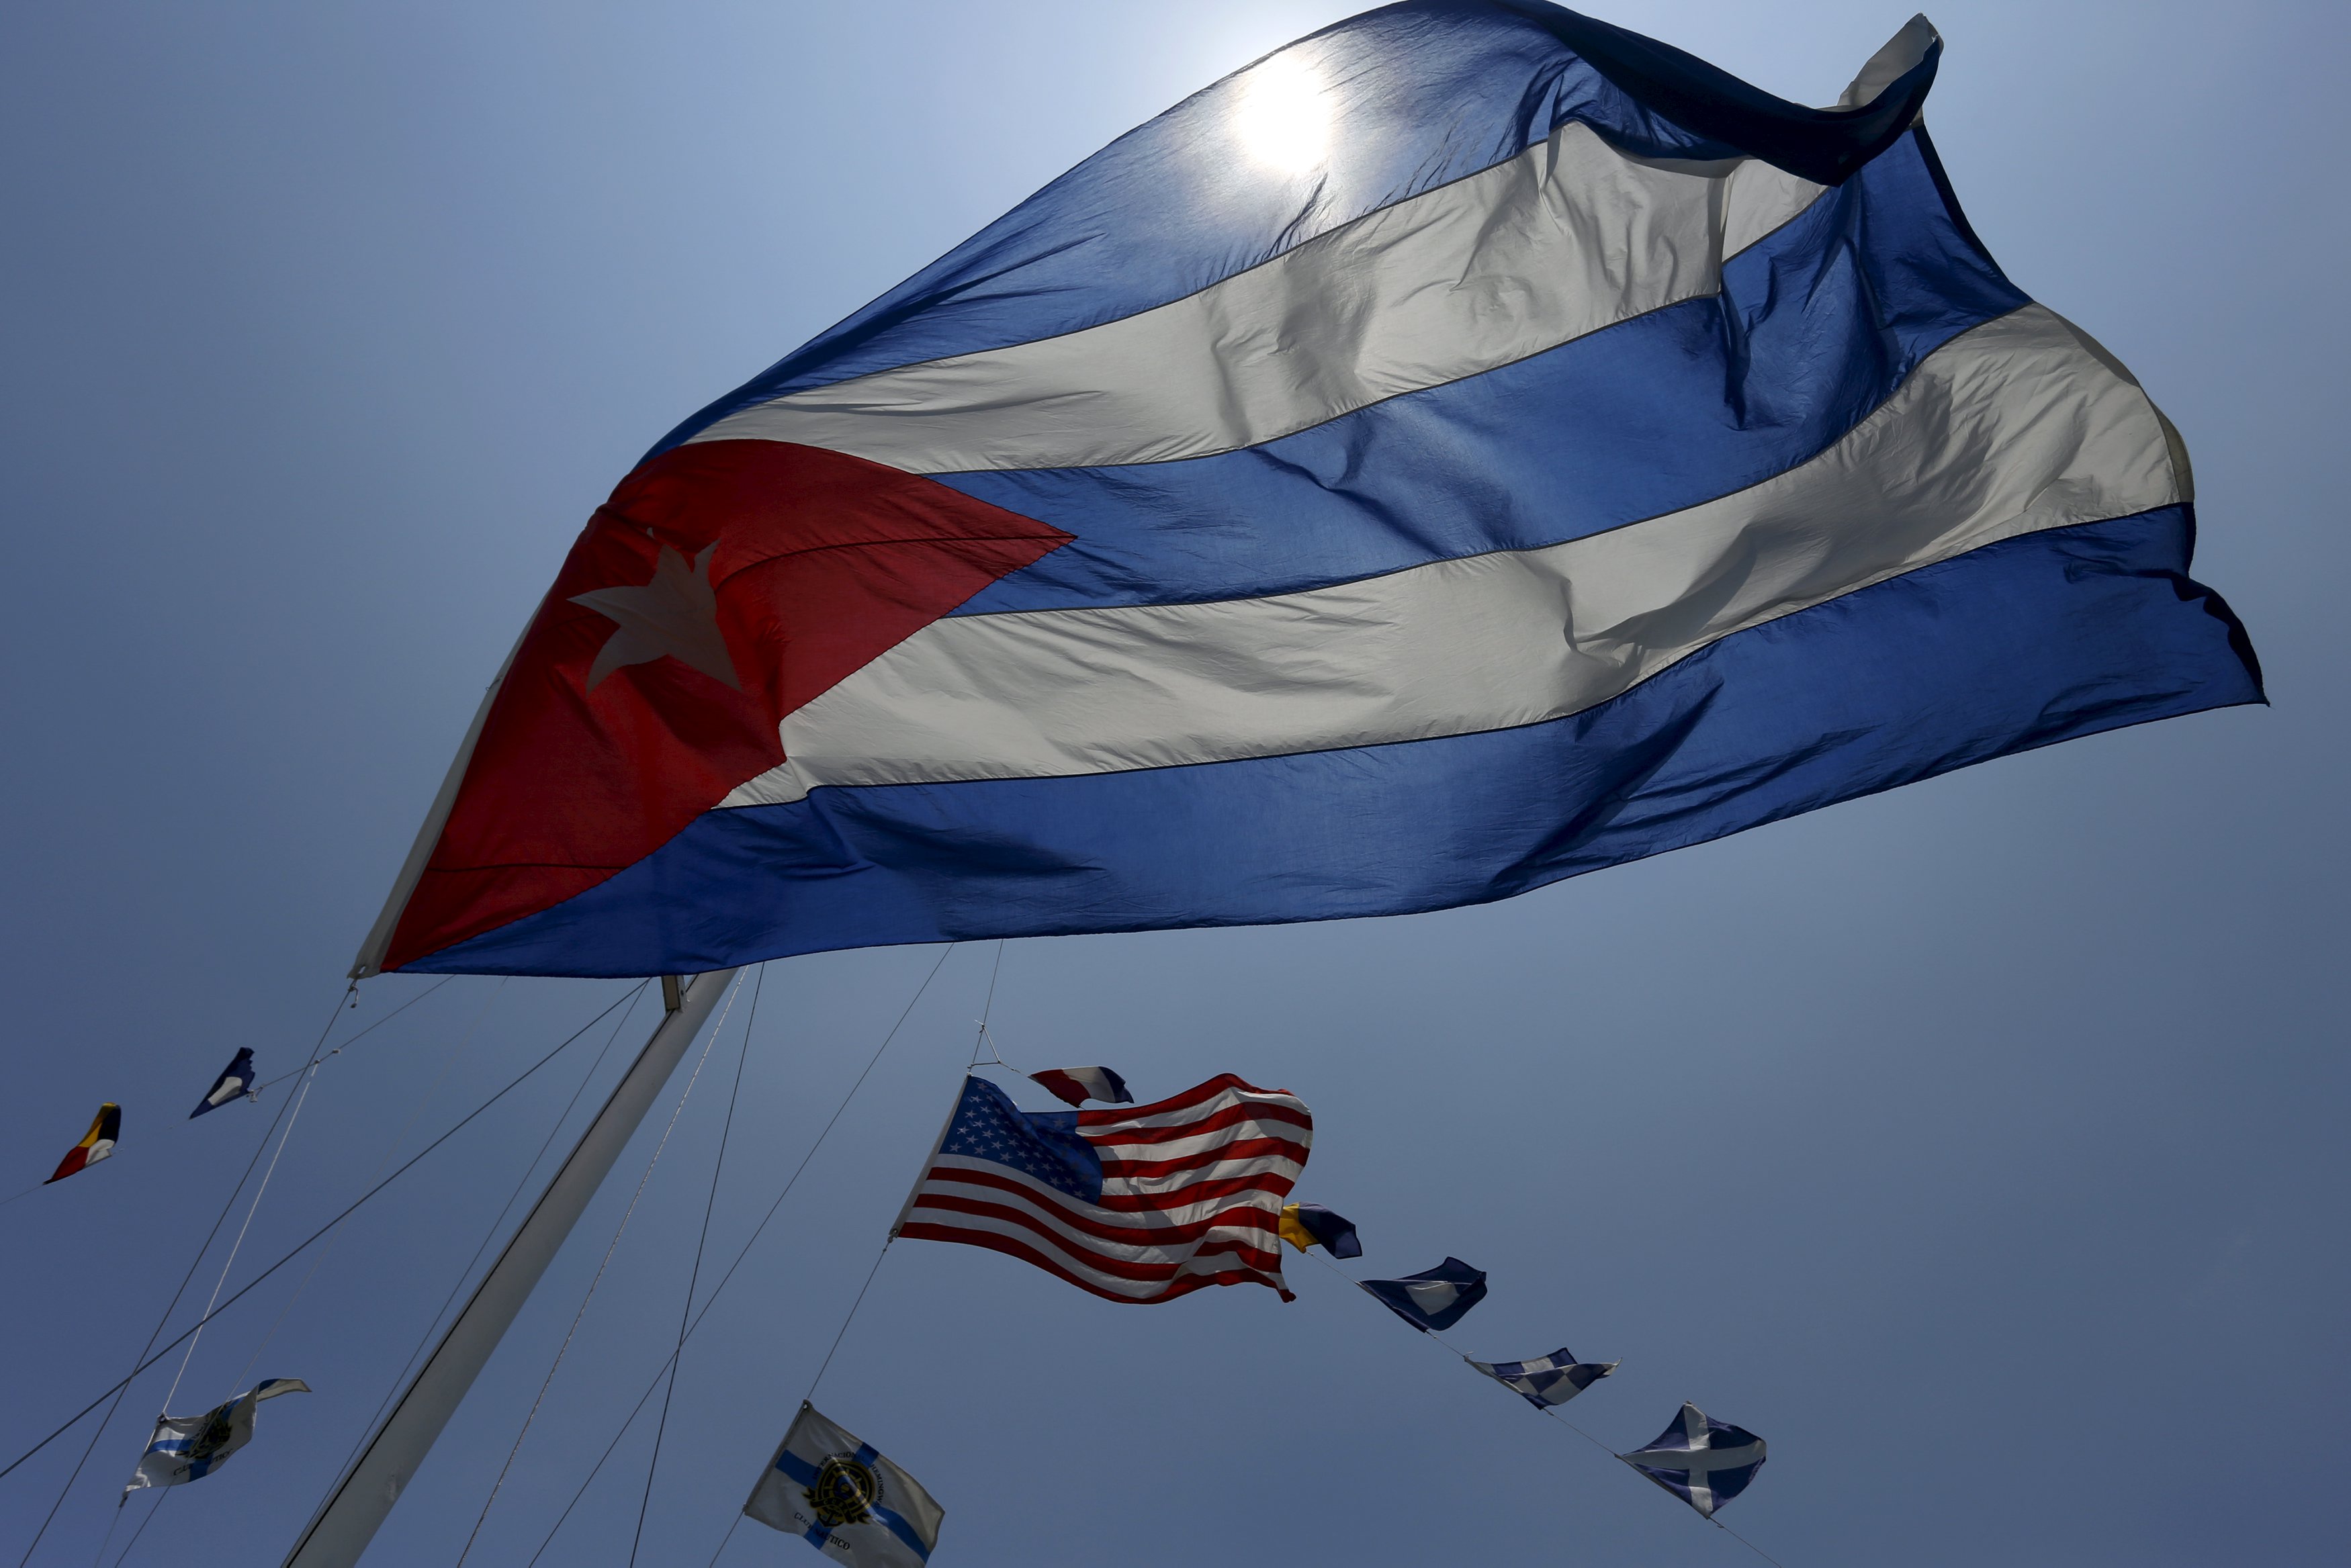 Cuba was officially removed from the U.S. Department of State's list of state sponsors of terrorism Friday, six weeks after the administration of President Barack Obama first announced the move.